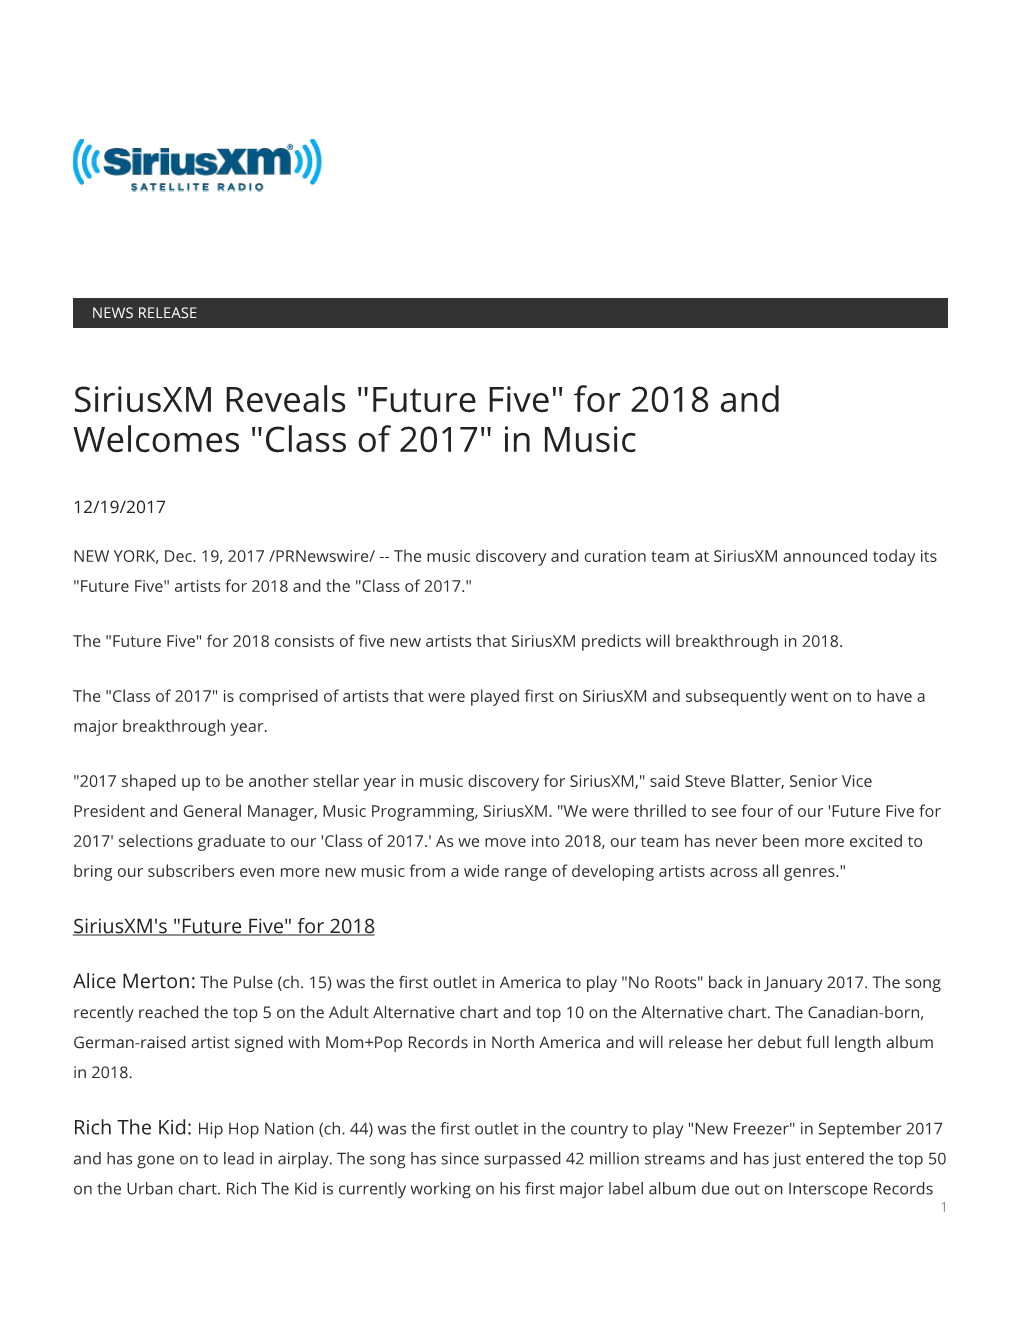 Siriusxm Reveals "Future Five" for 2018 and Welcomes "Class of 2017" in Music